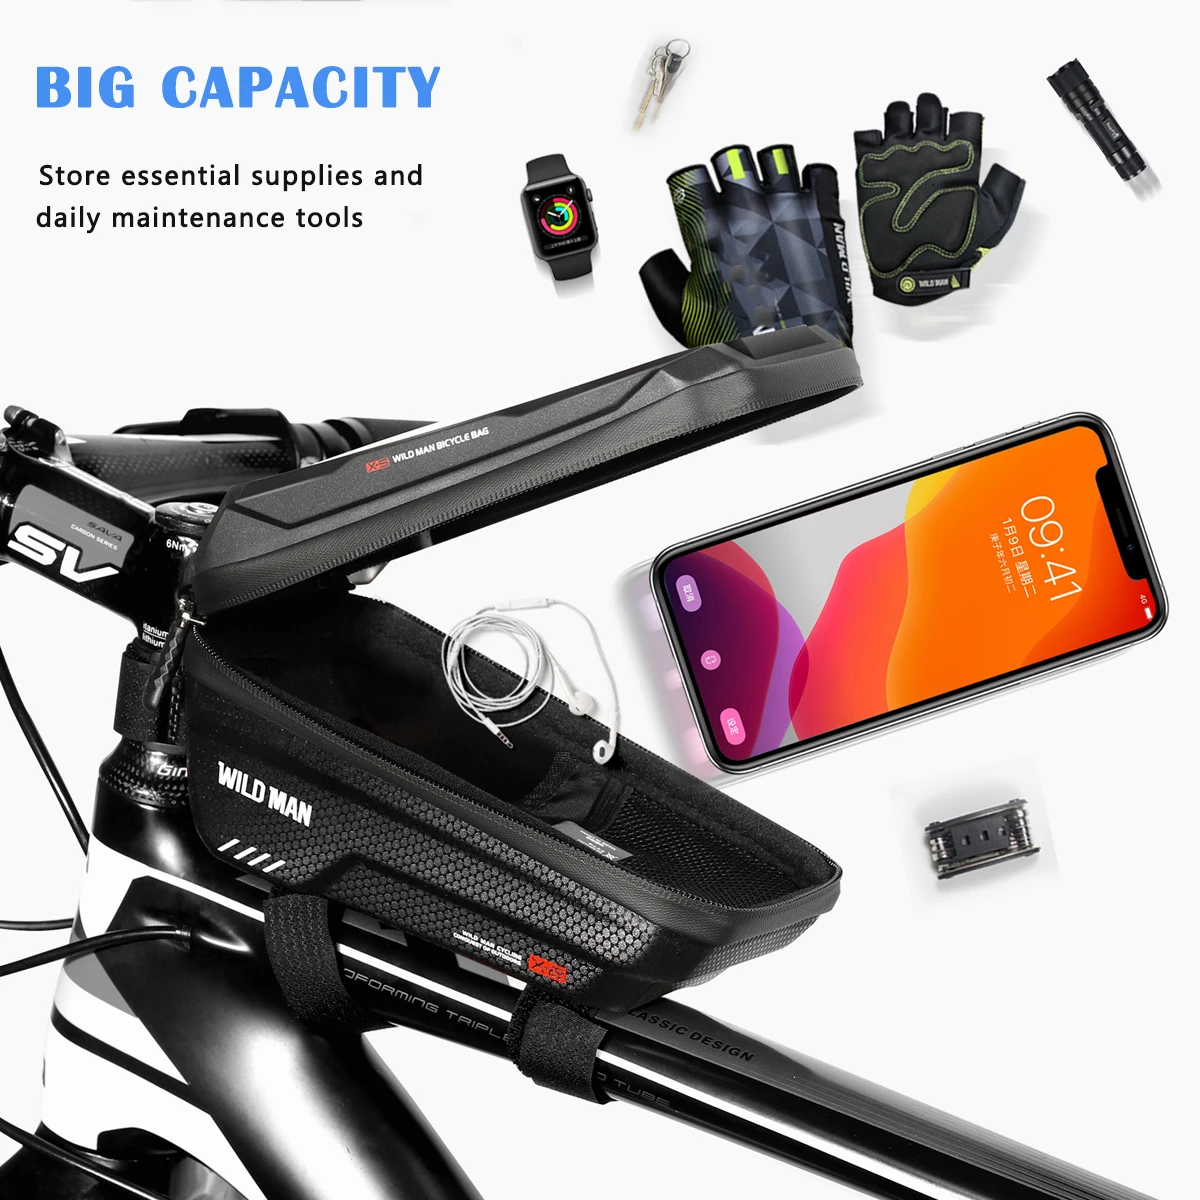 wild man bicycle pu hard shell front frame bag waterproof touch screen reflection phone case cycling bike accessories free global shipping